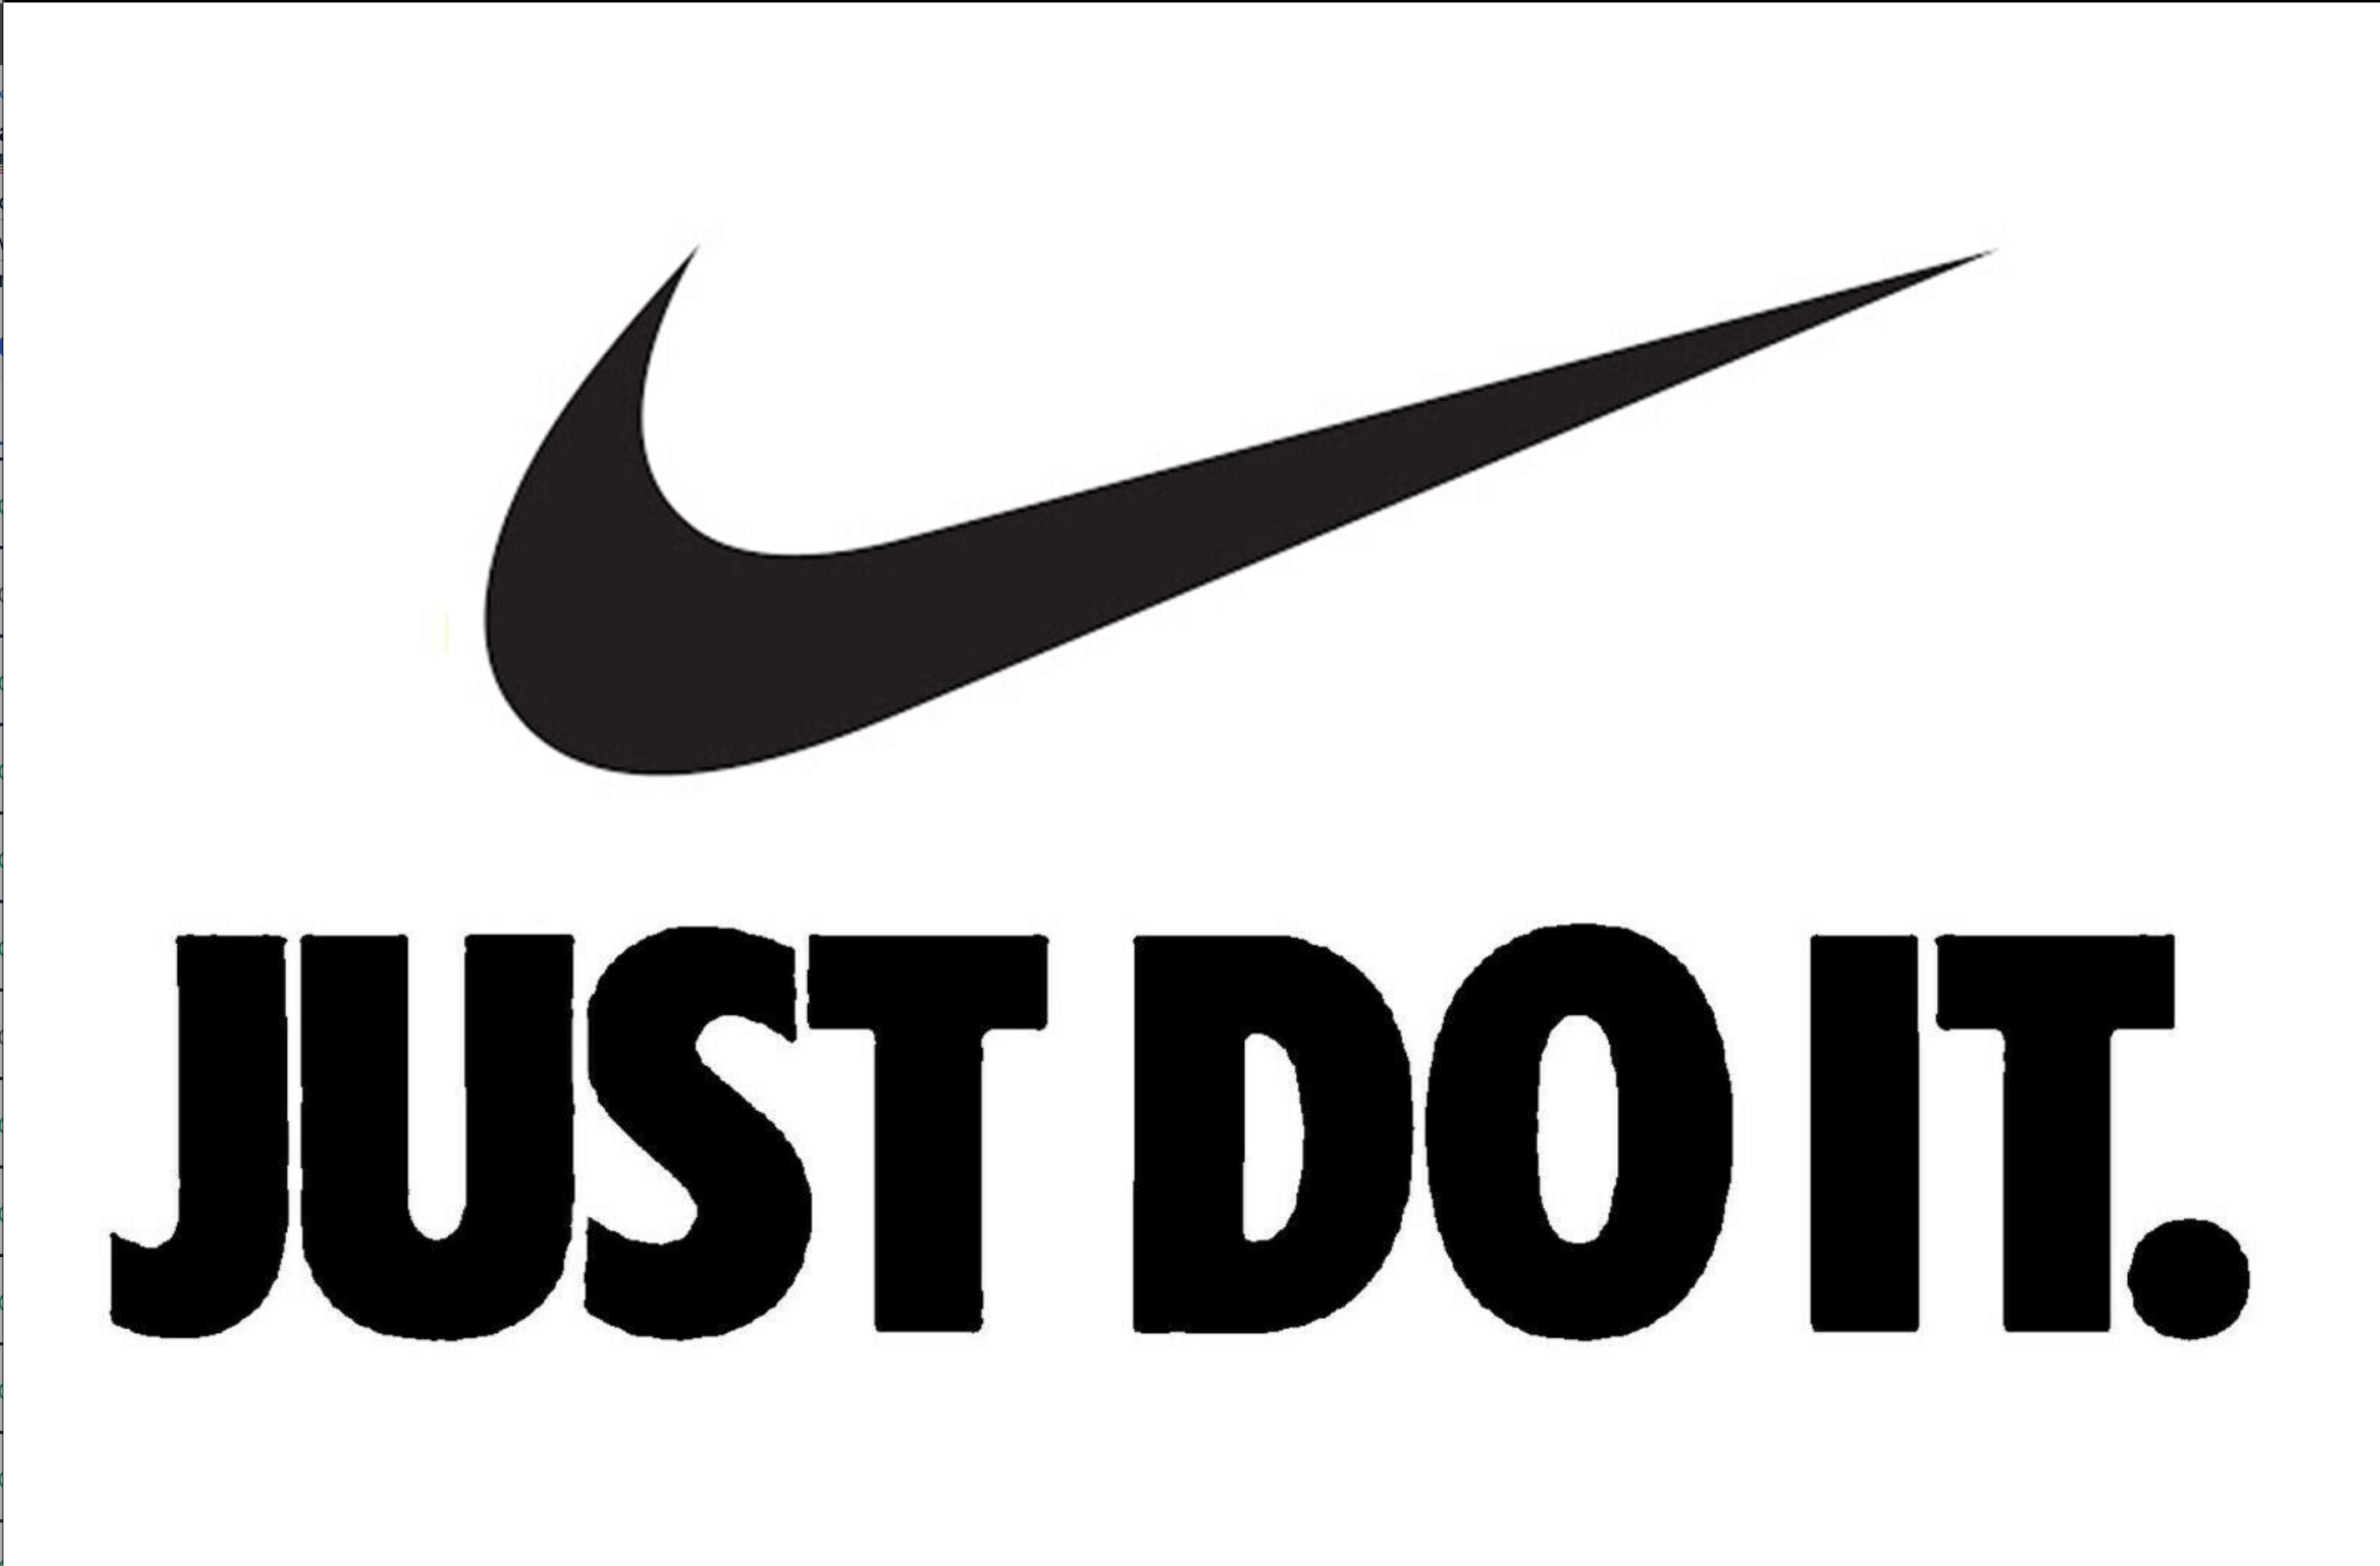 The Nike swoosh logo with "JUST DO IT." in capital letters